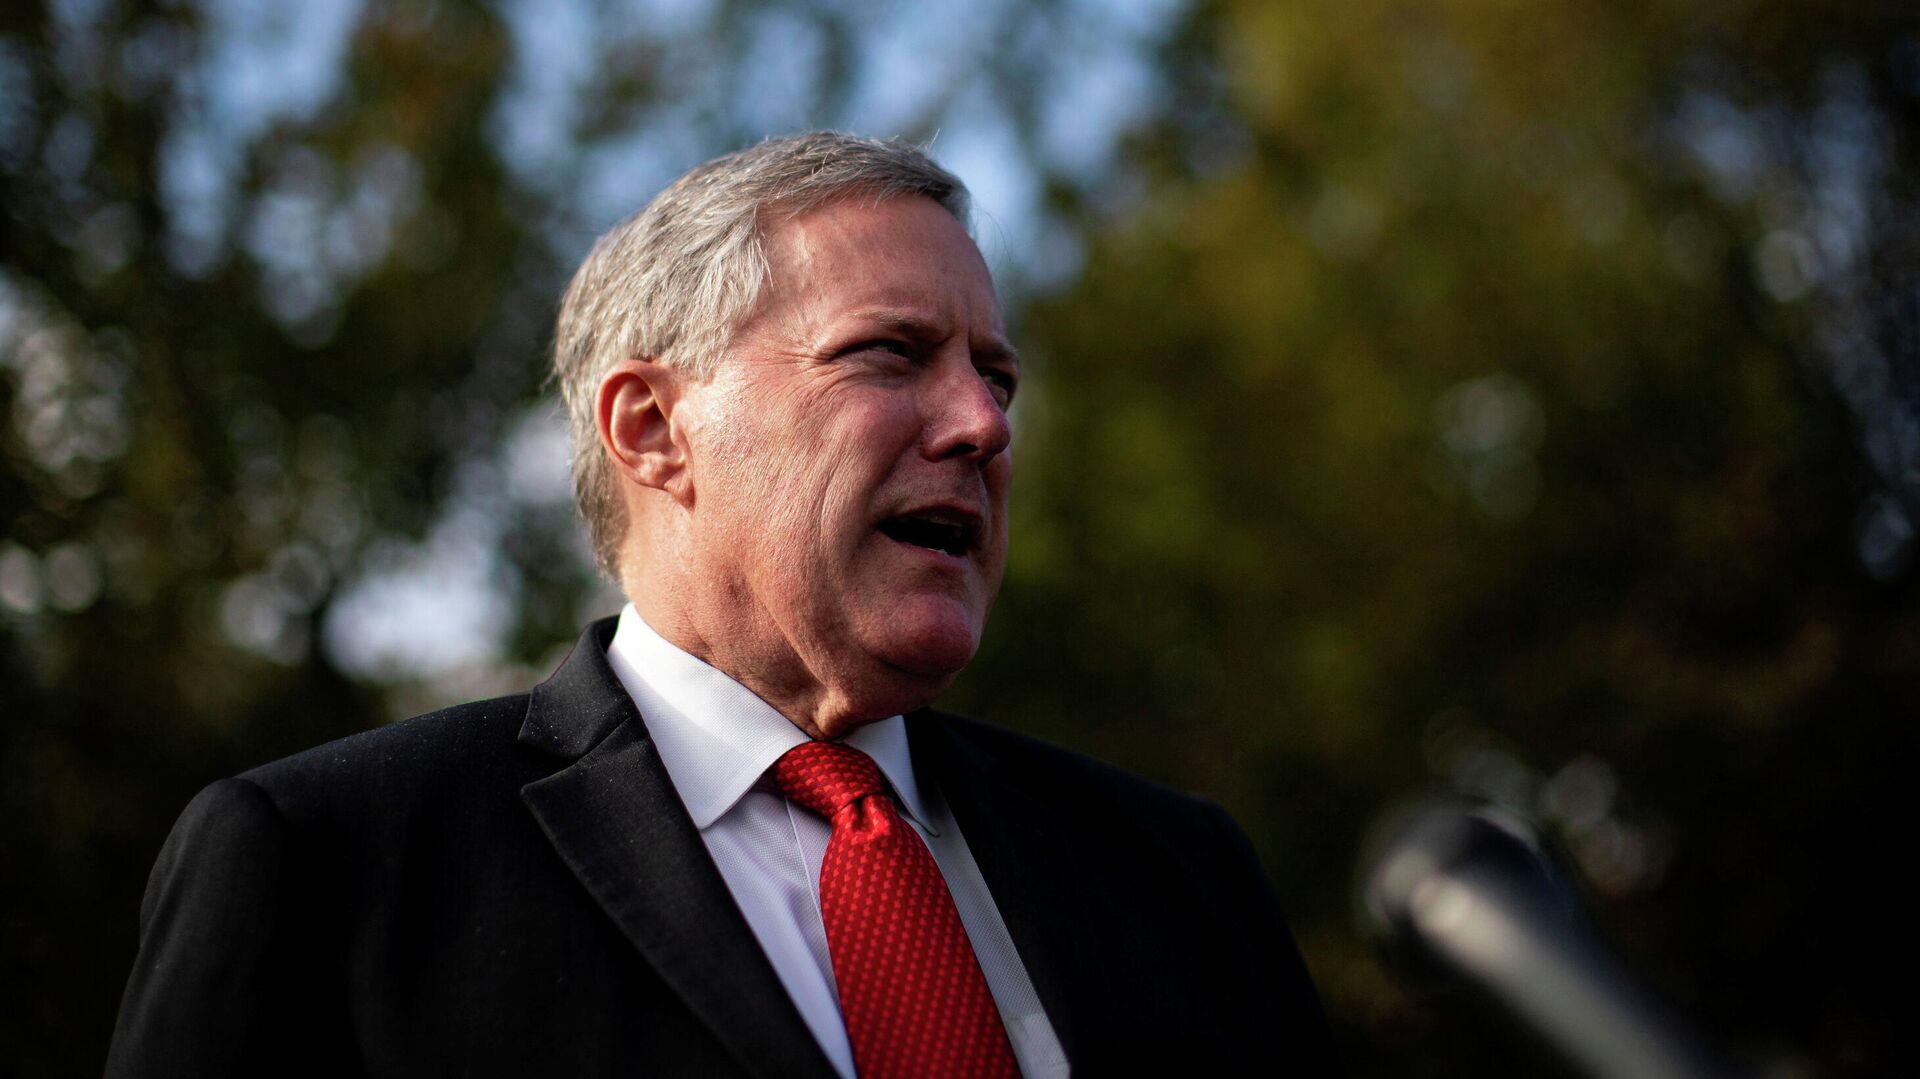 White House Chief of Staff Mark Meadows speaks to reporters following a television interview, outside the White House in Washington, U.S. October 21, 2020 - Sputnik International, 1920, 14.12.2021